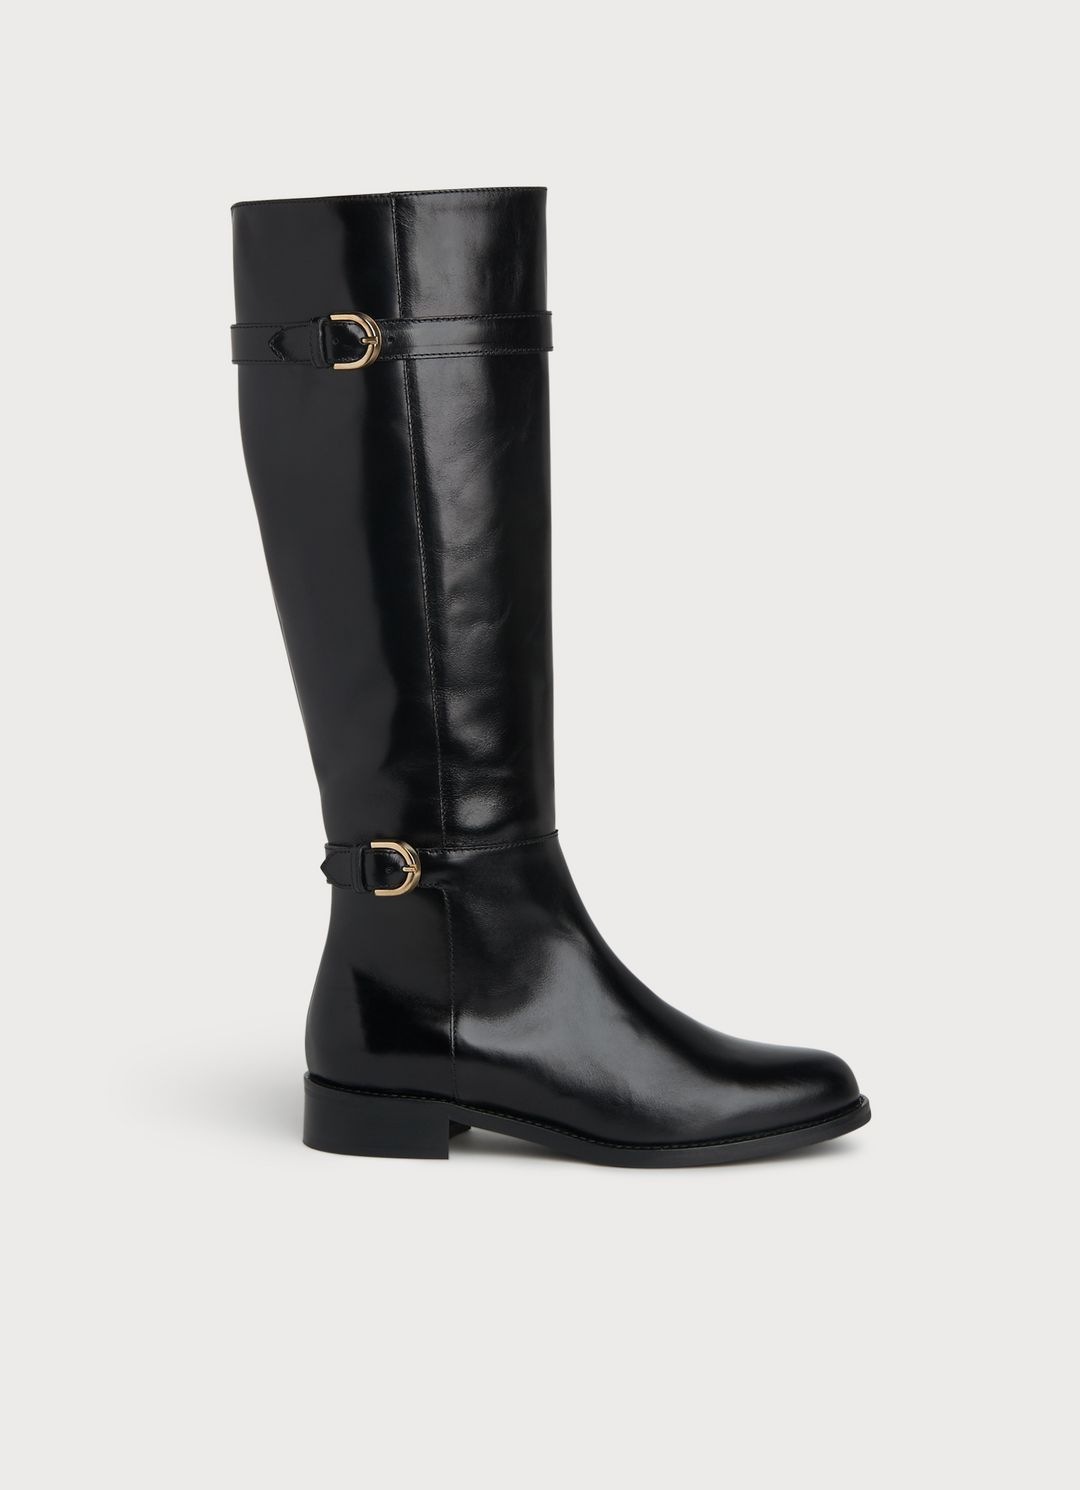 most popular knee high boots